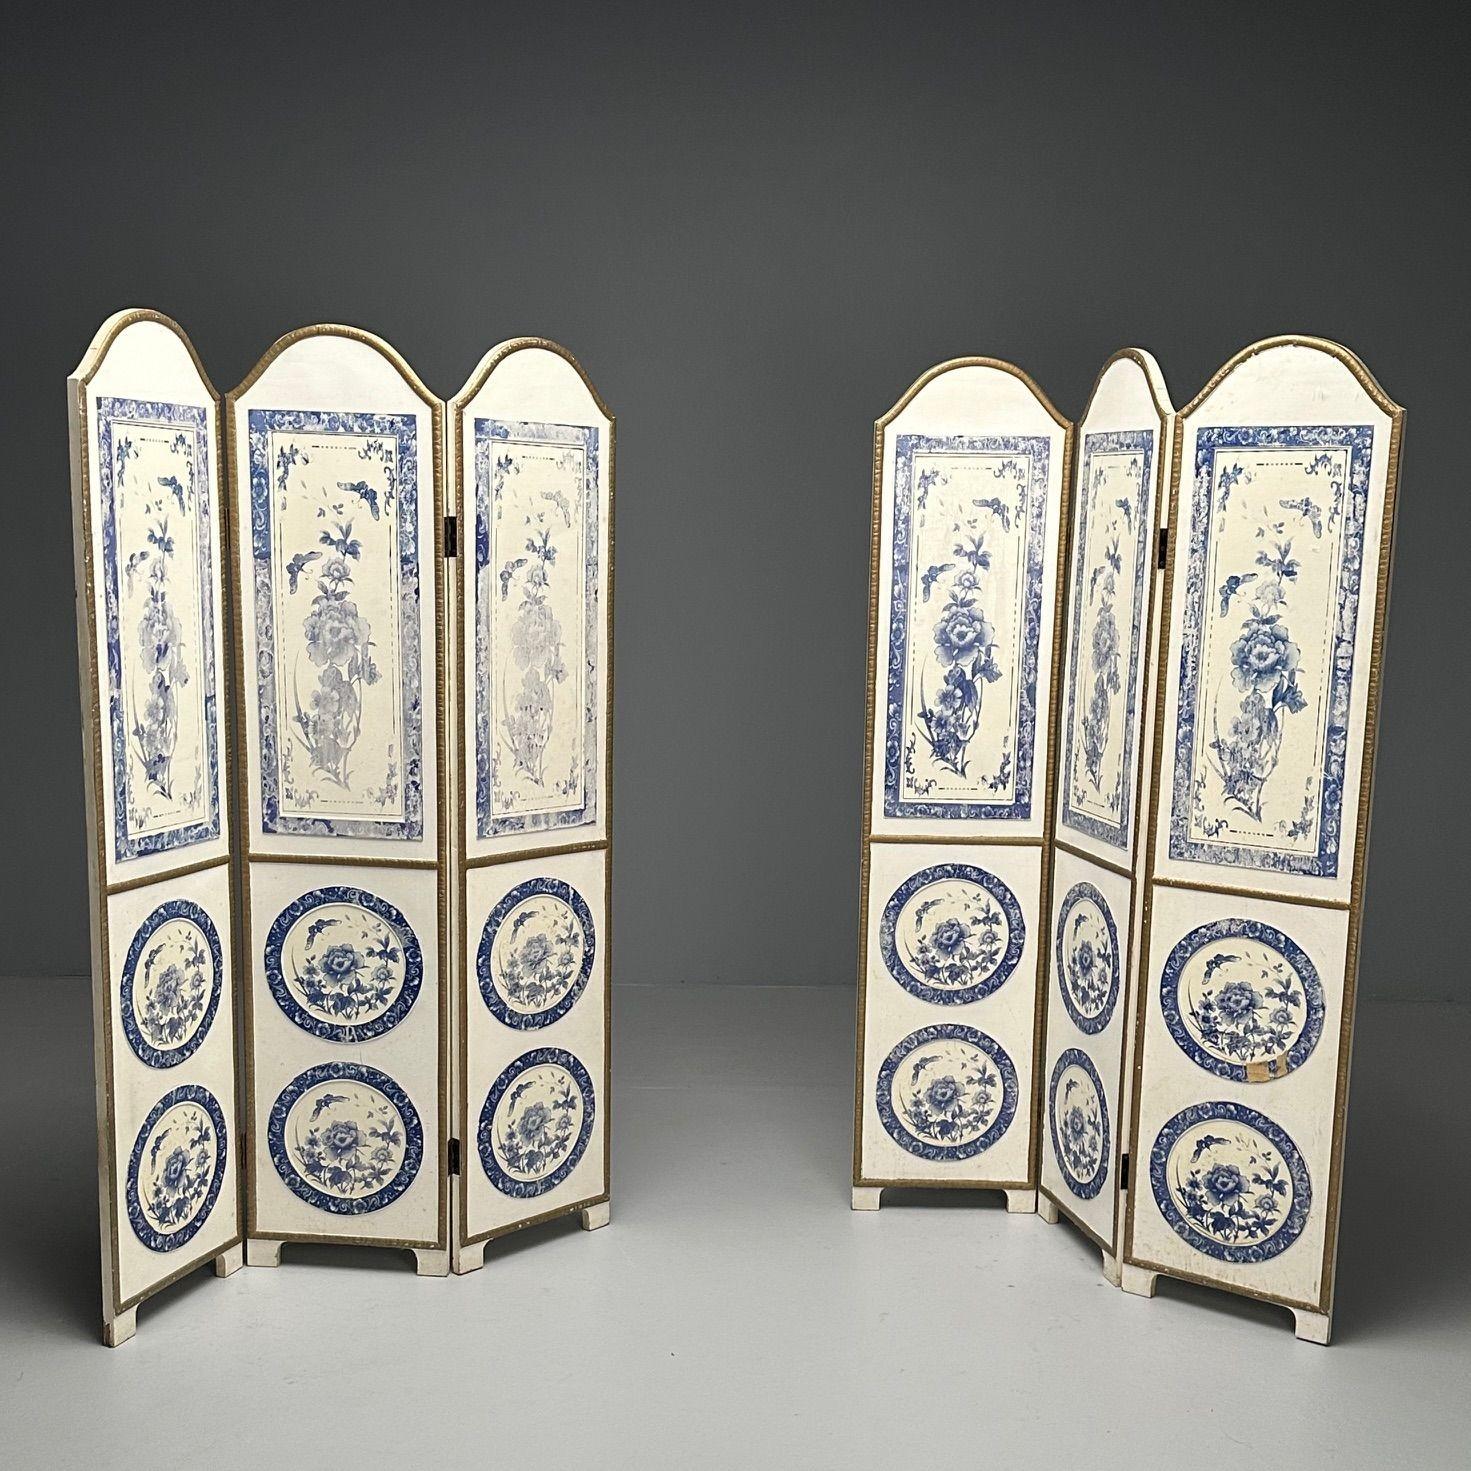 Italian, Chinoiserie, Room Dividers, Screens, Blue and White, Floral Motif, Gilt In Good Condition For Sale In Stamford, CT